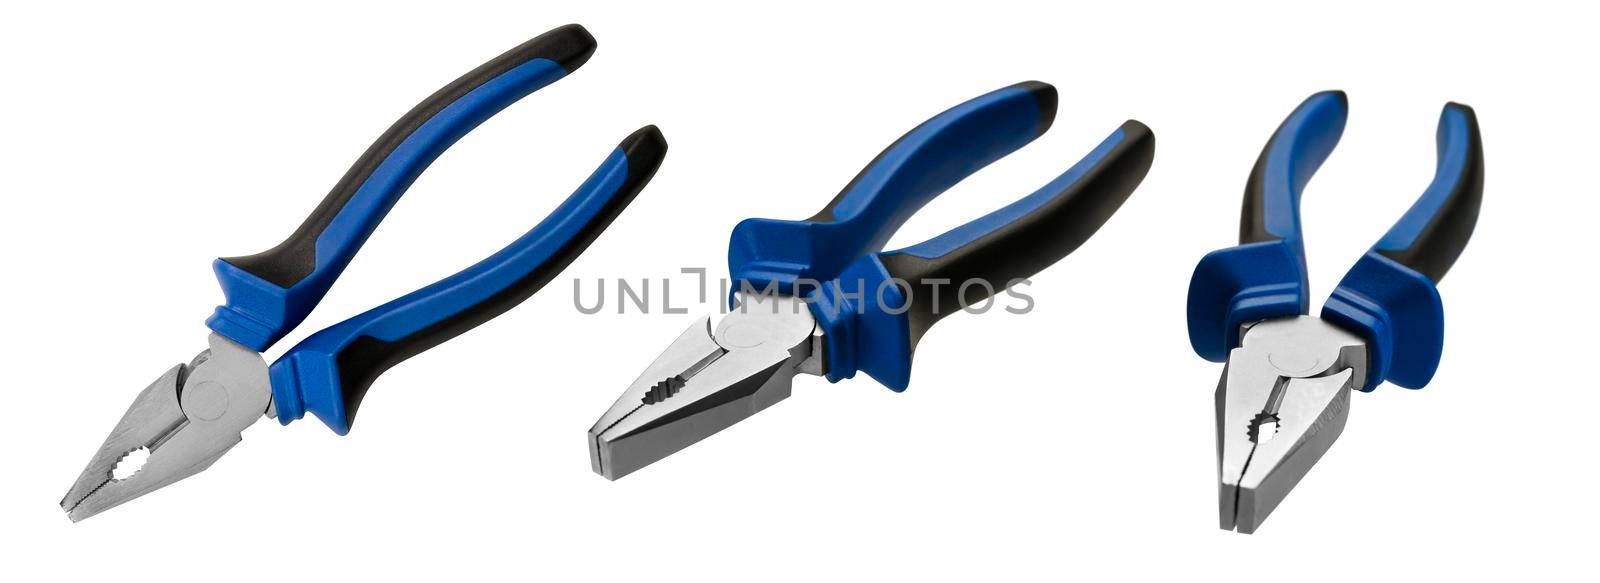 Pliers in different angles on a white background by butenkow